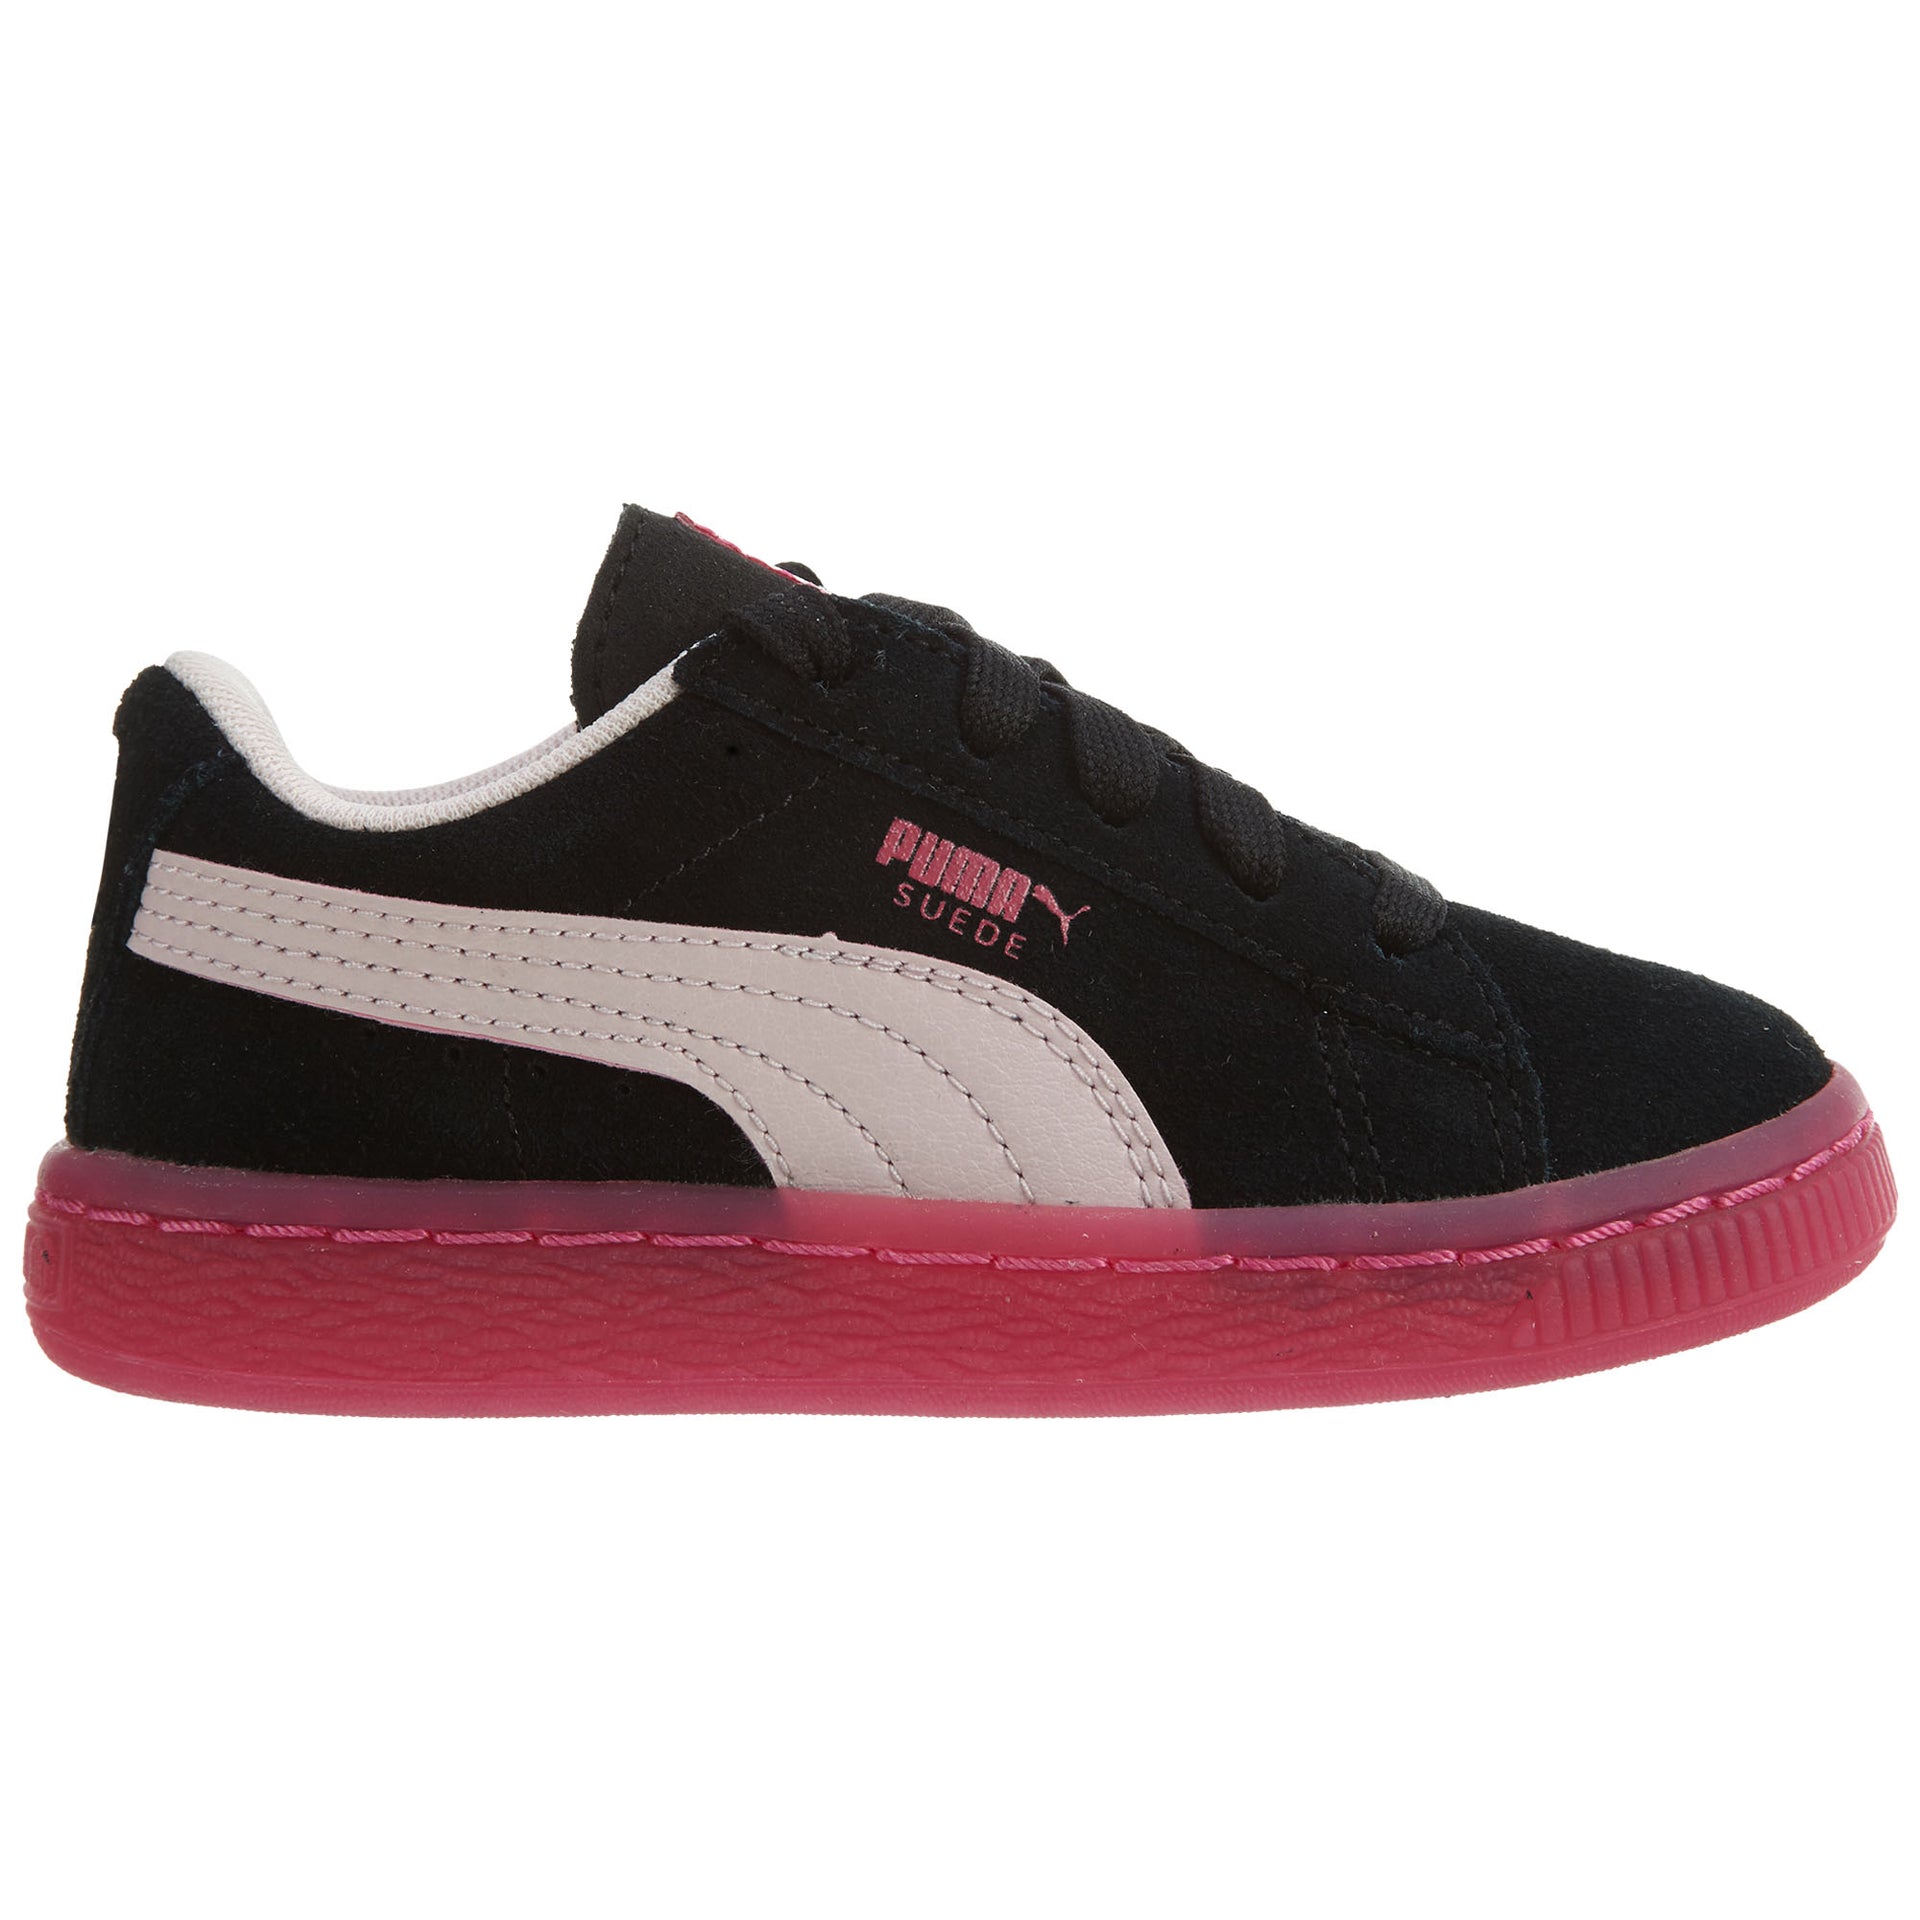 Puma Suede Lfs Iced Inf Toddlers Style : 363085